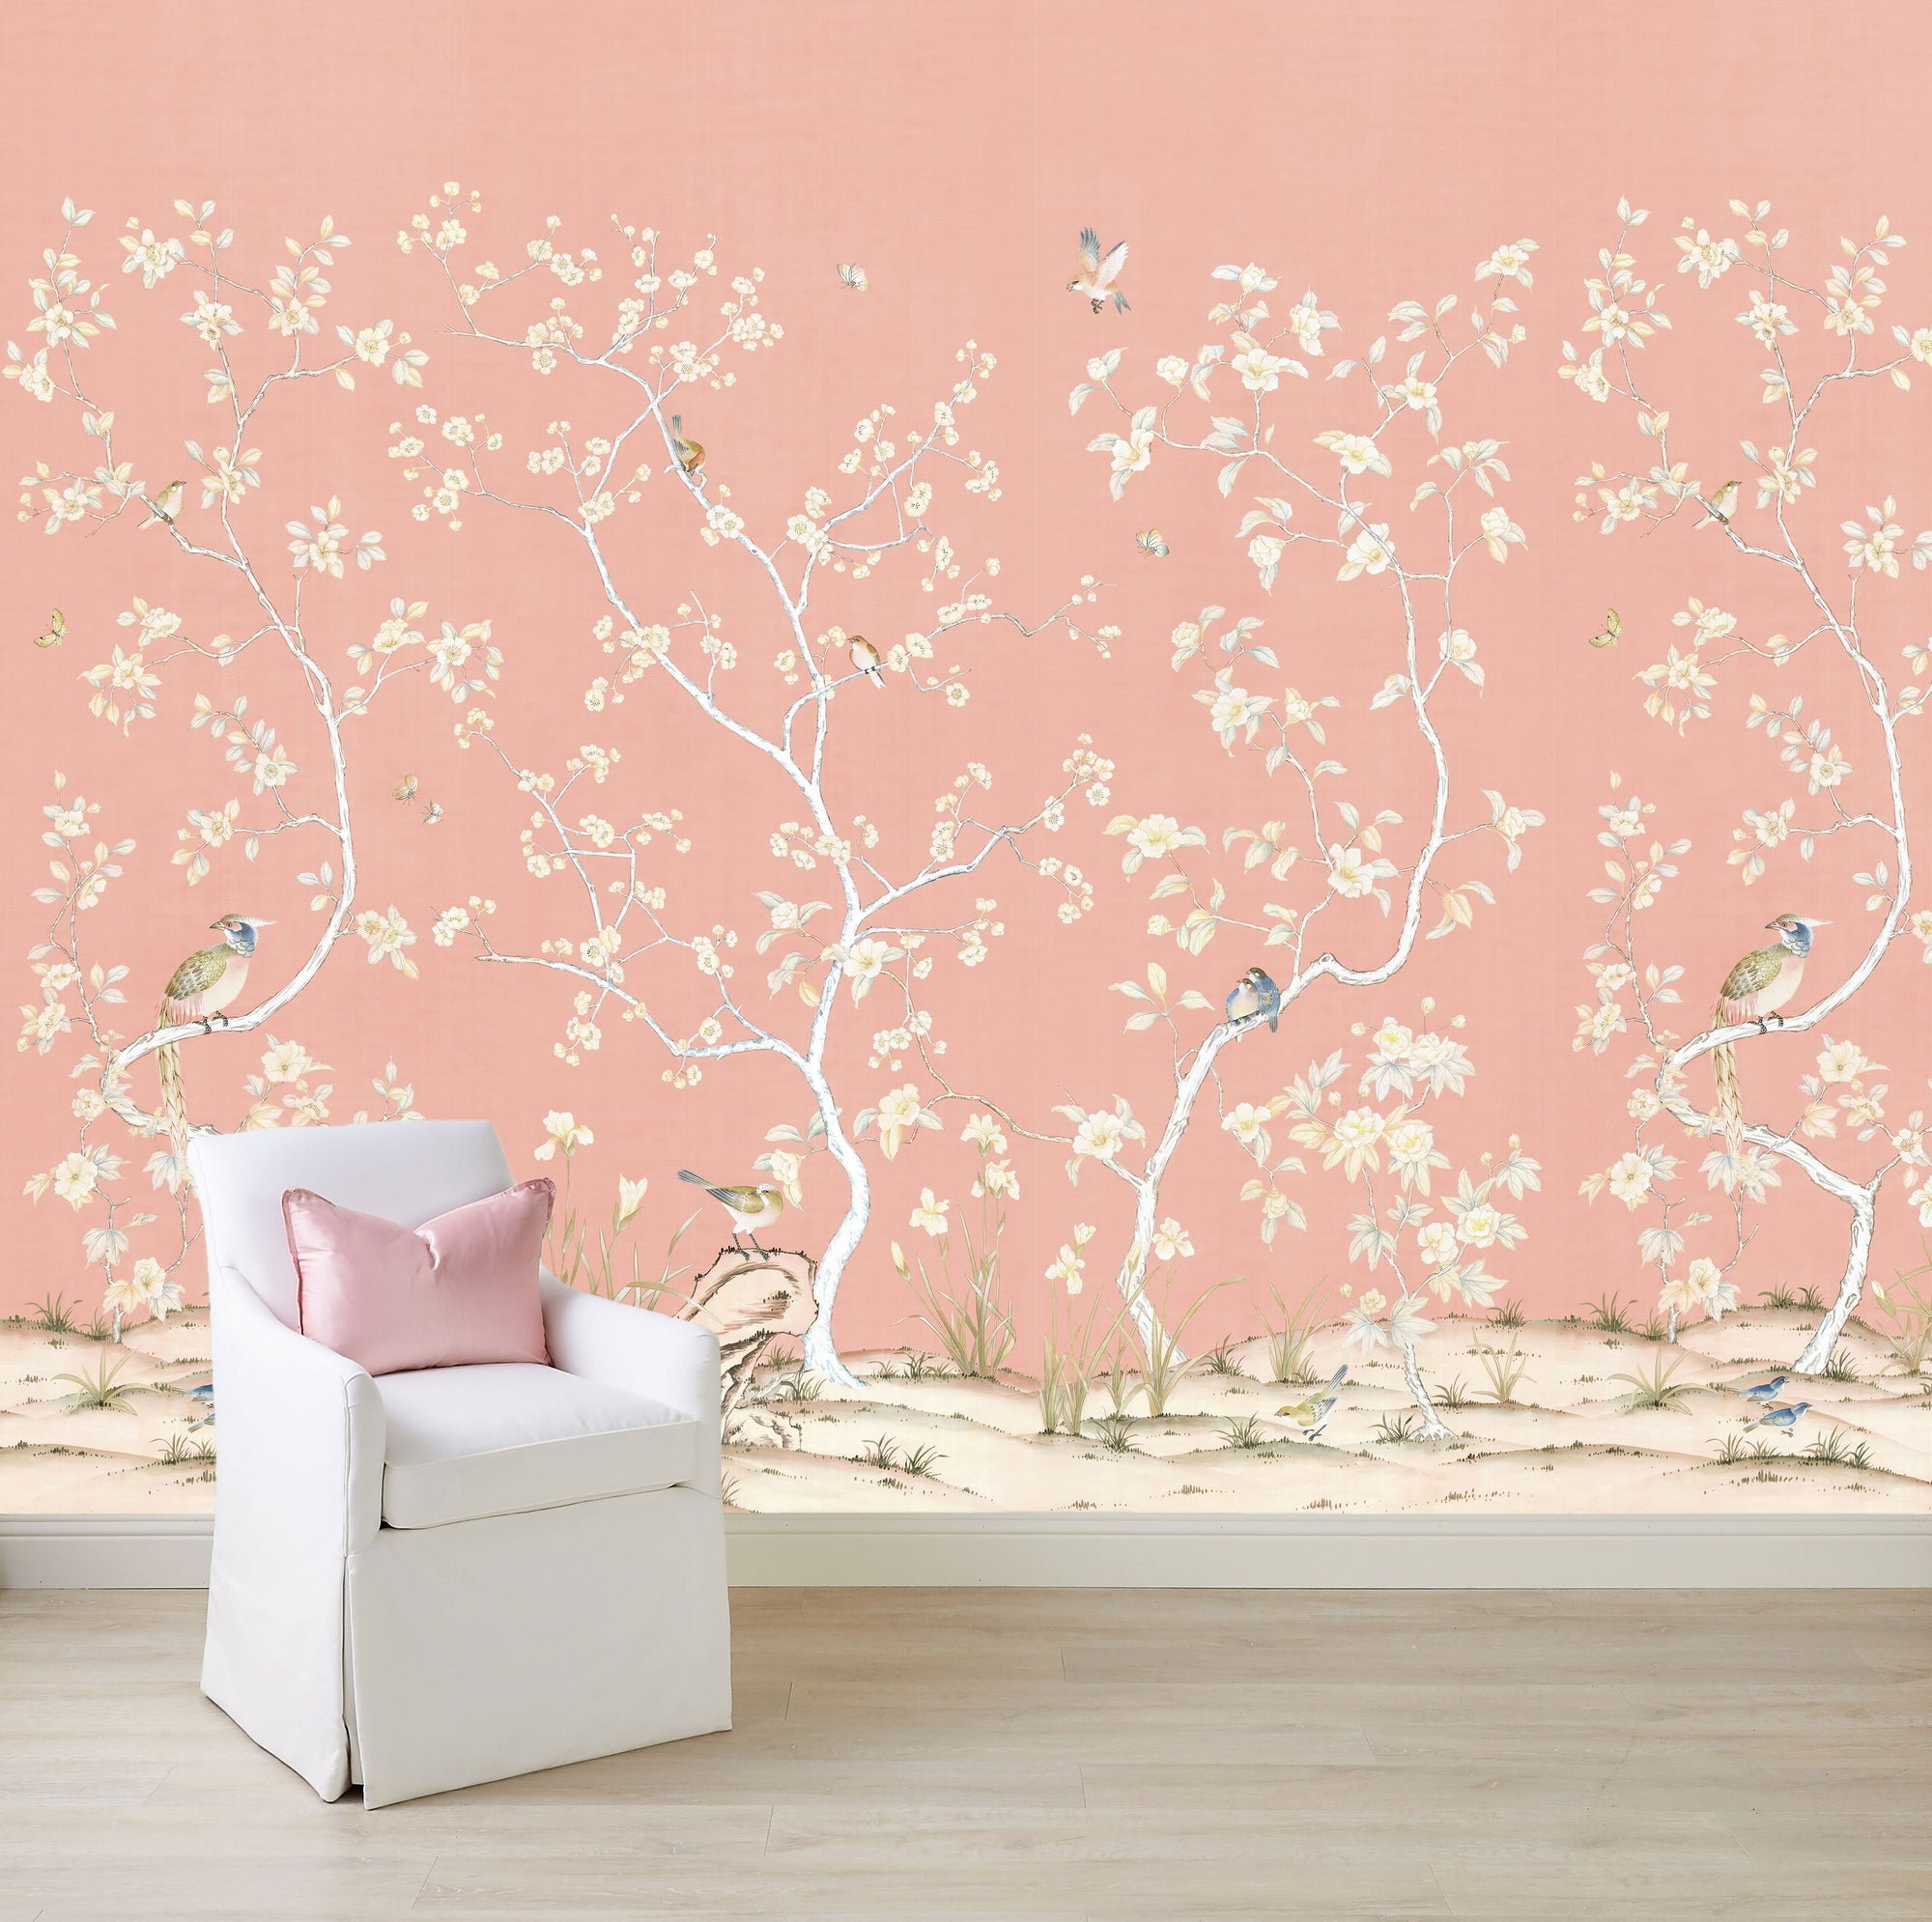 Traditional Chinoiserie Carlisle Wallpaper Mural in Coral on Wall